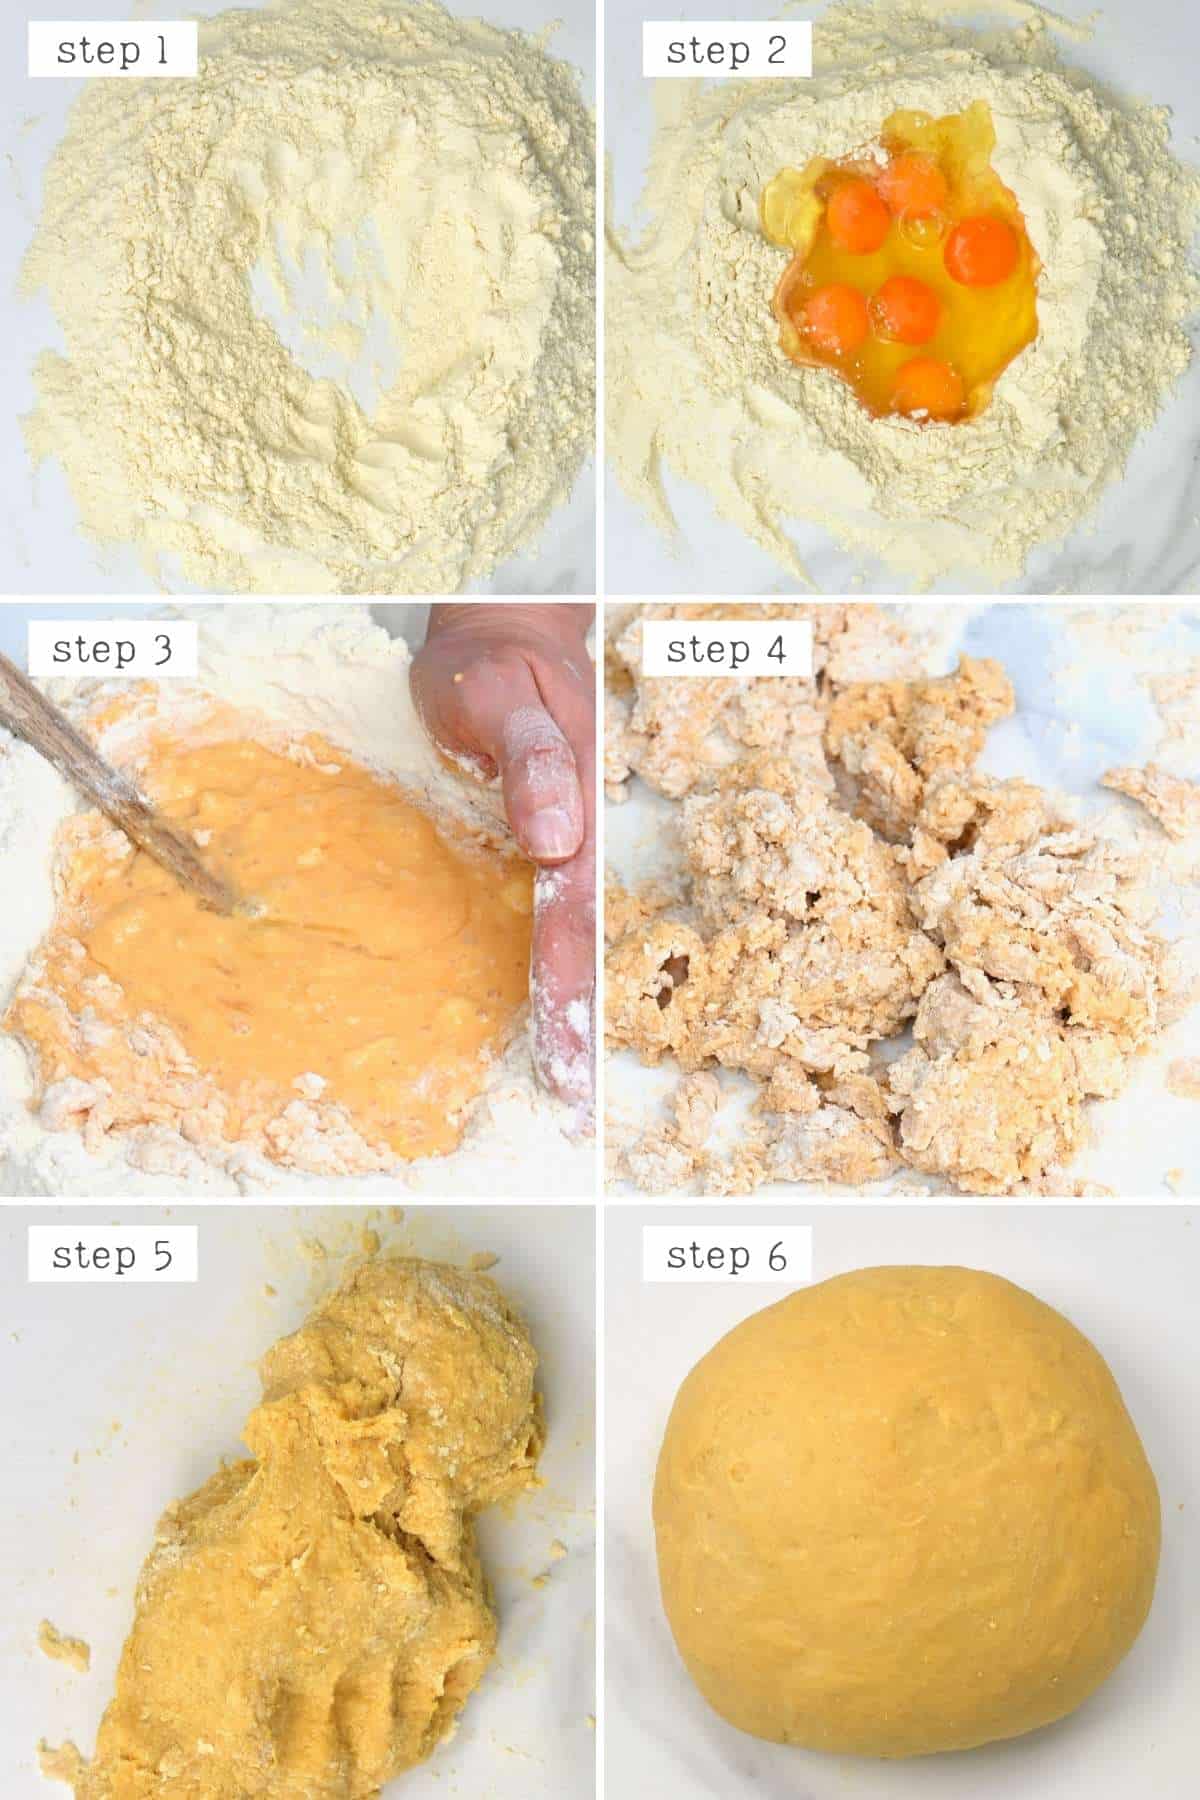 The Complete Guide to Making Fresh Egg Pasta